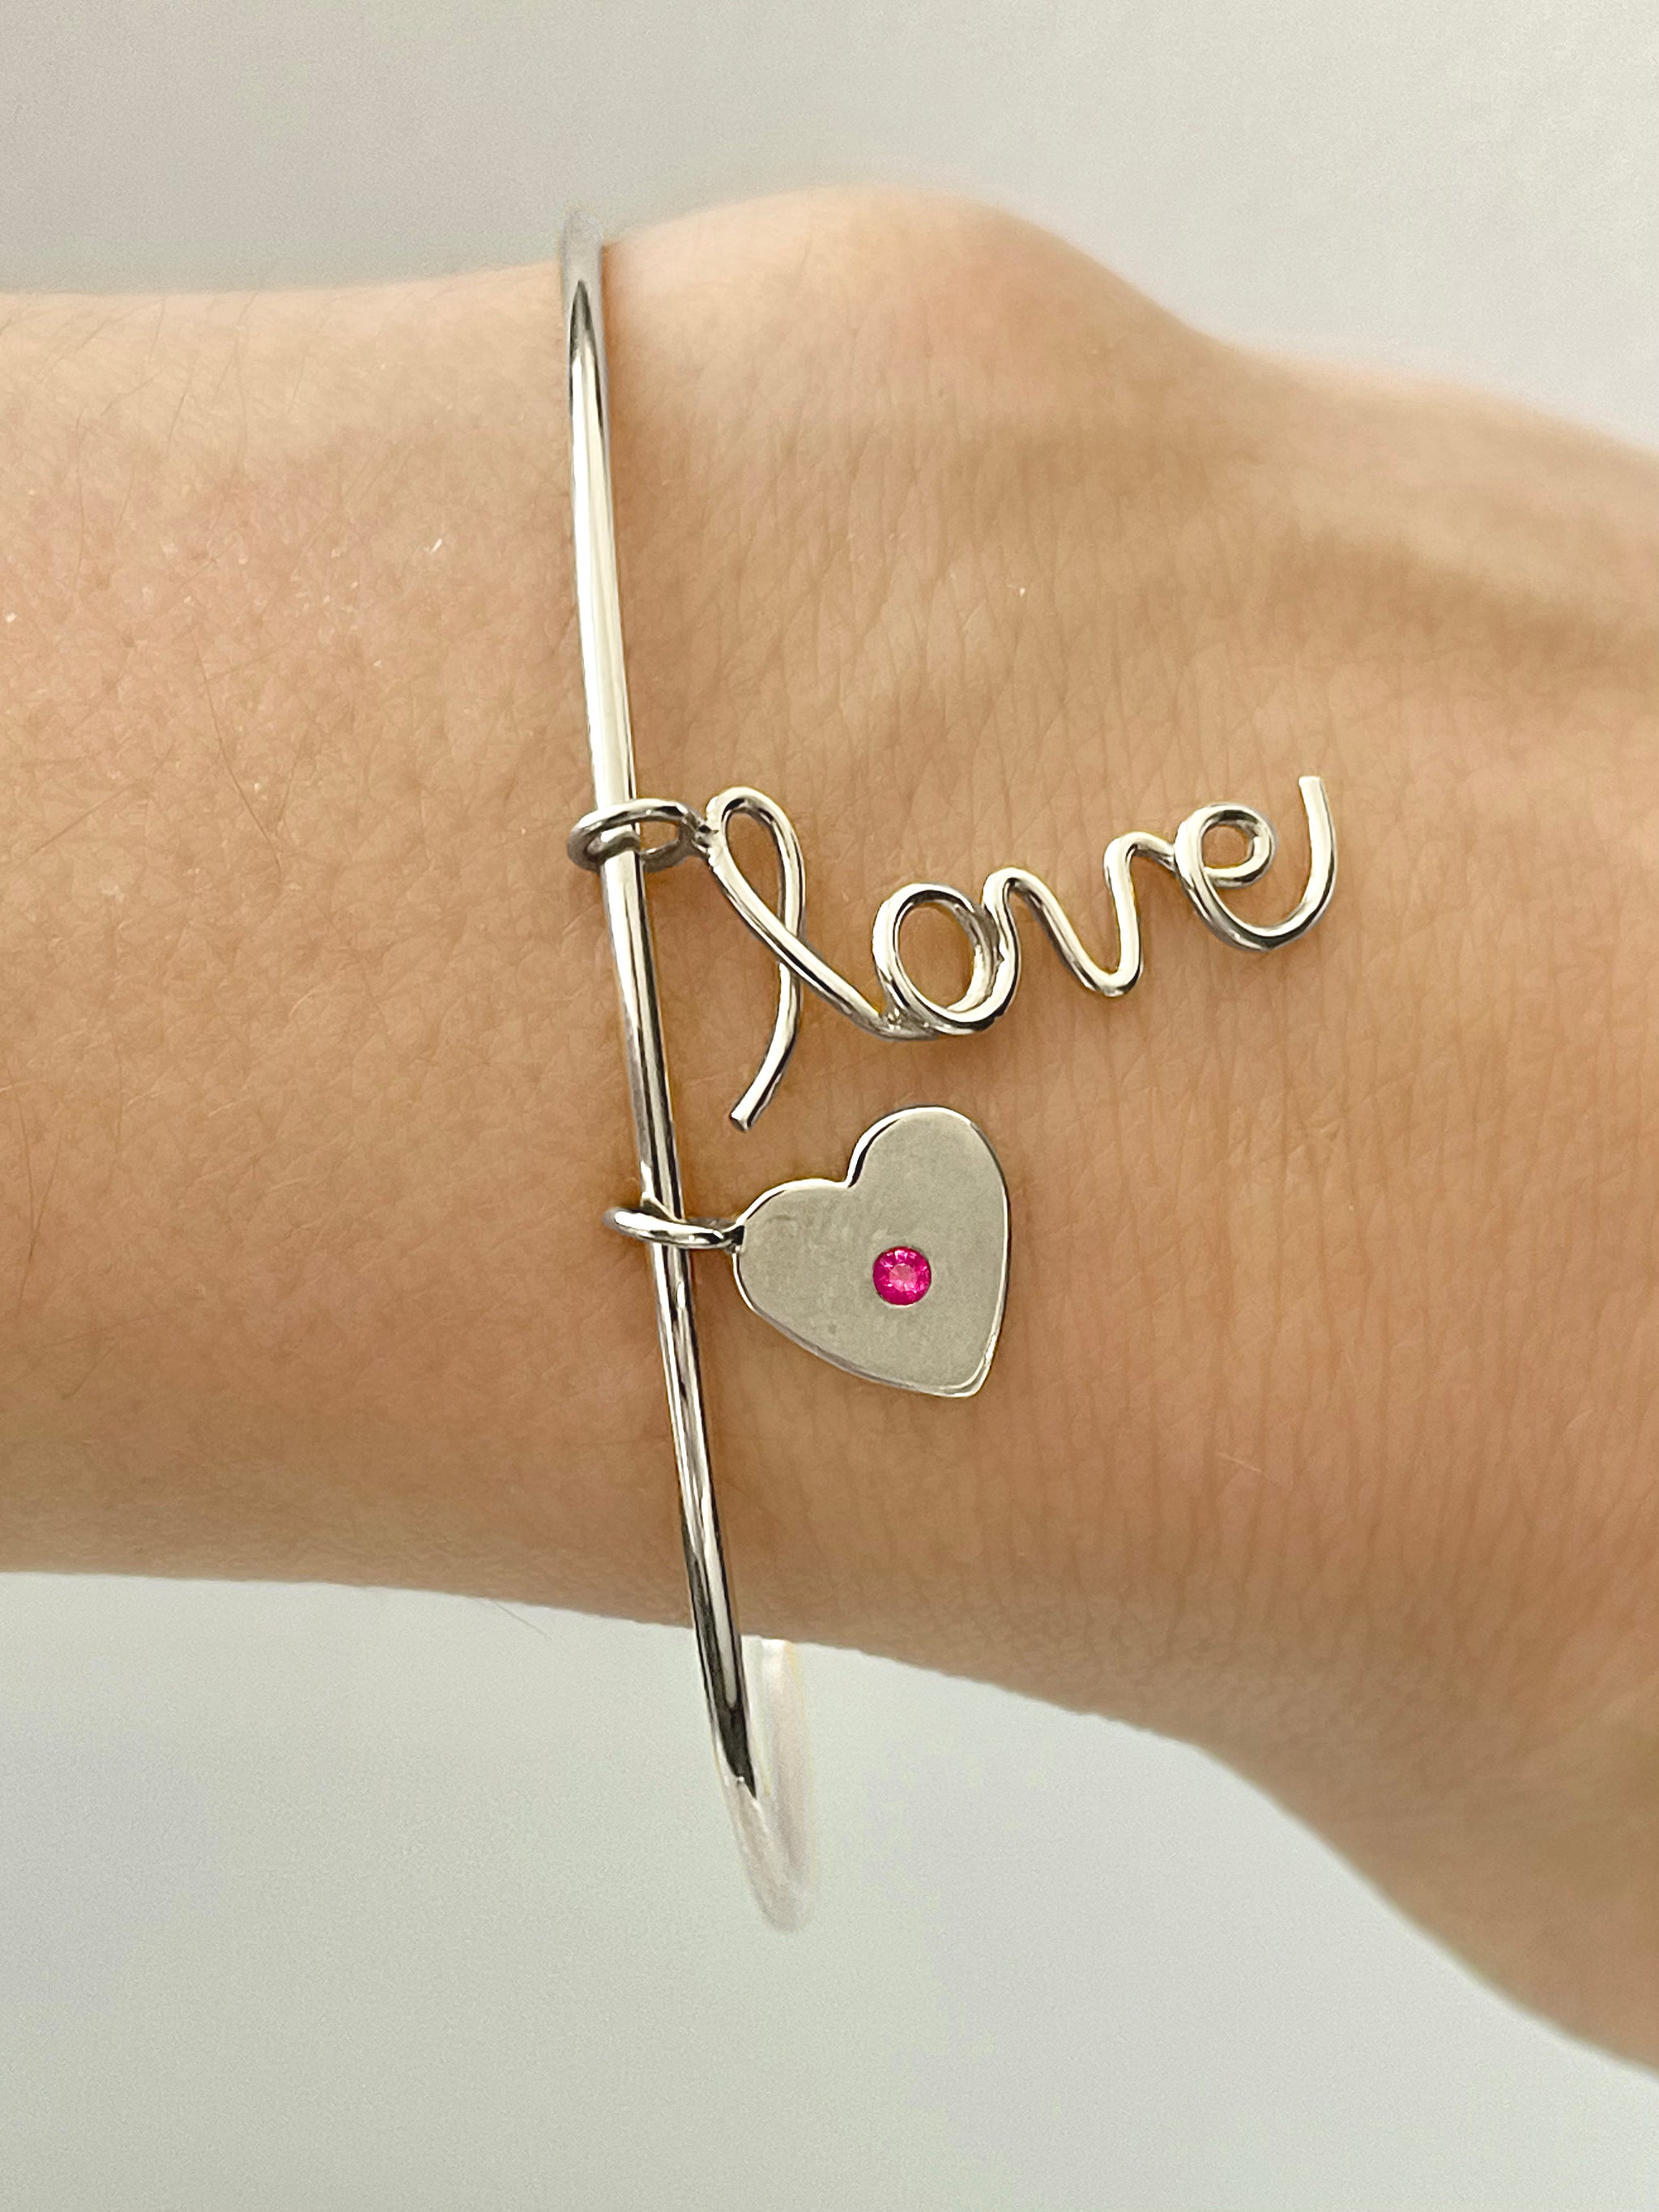 Love This Life Bracelet FAITH Hope Love Bangle Charms Silver Plated Grad  Gift 